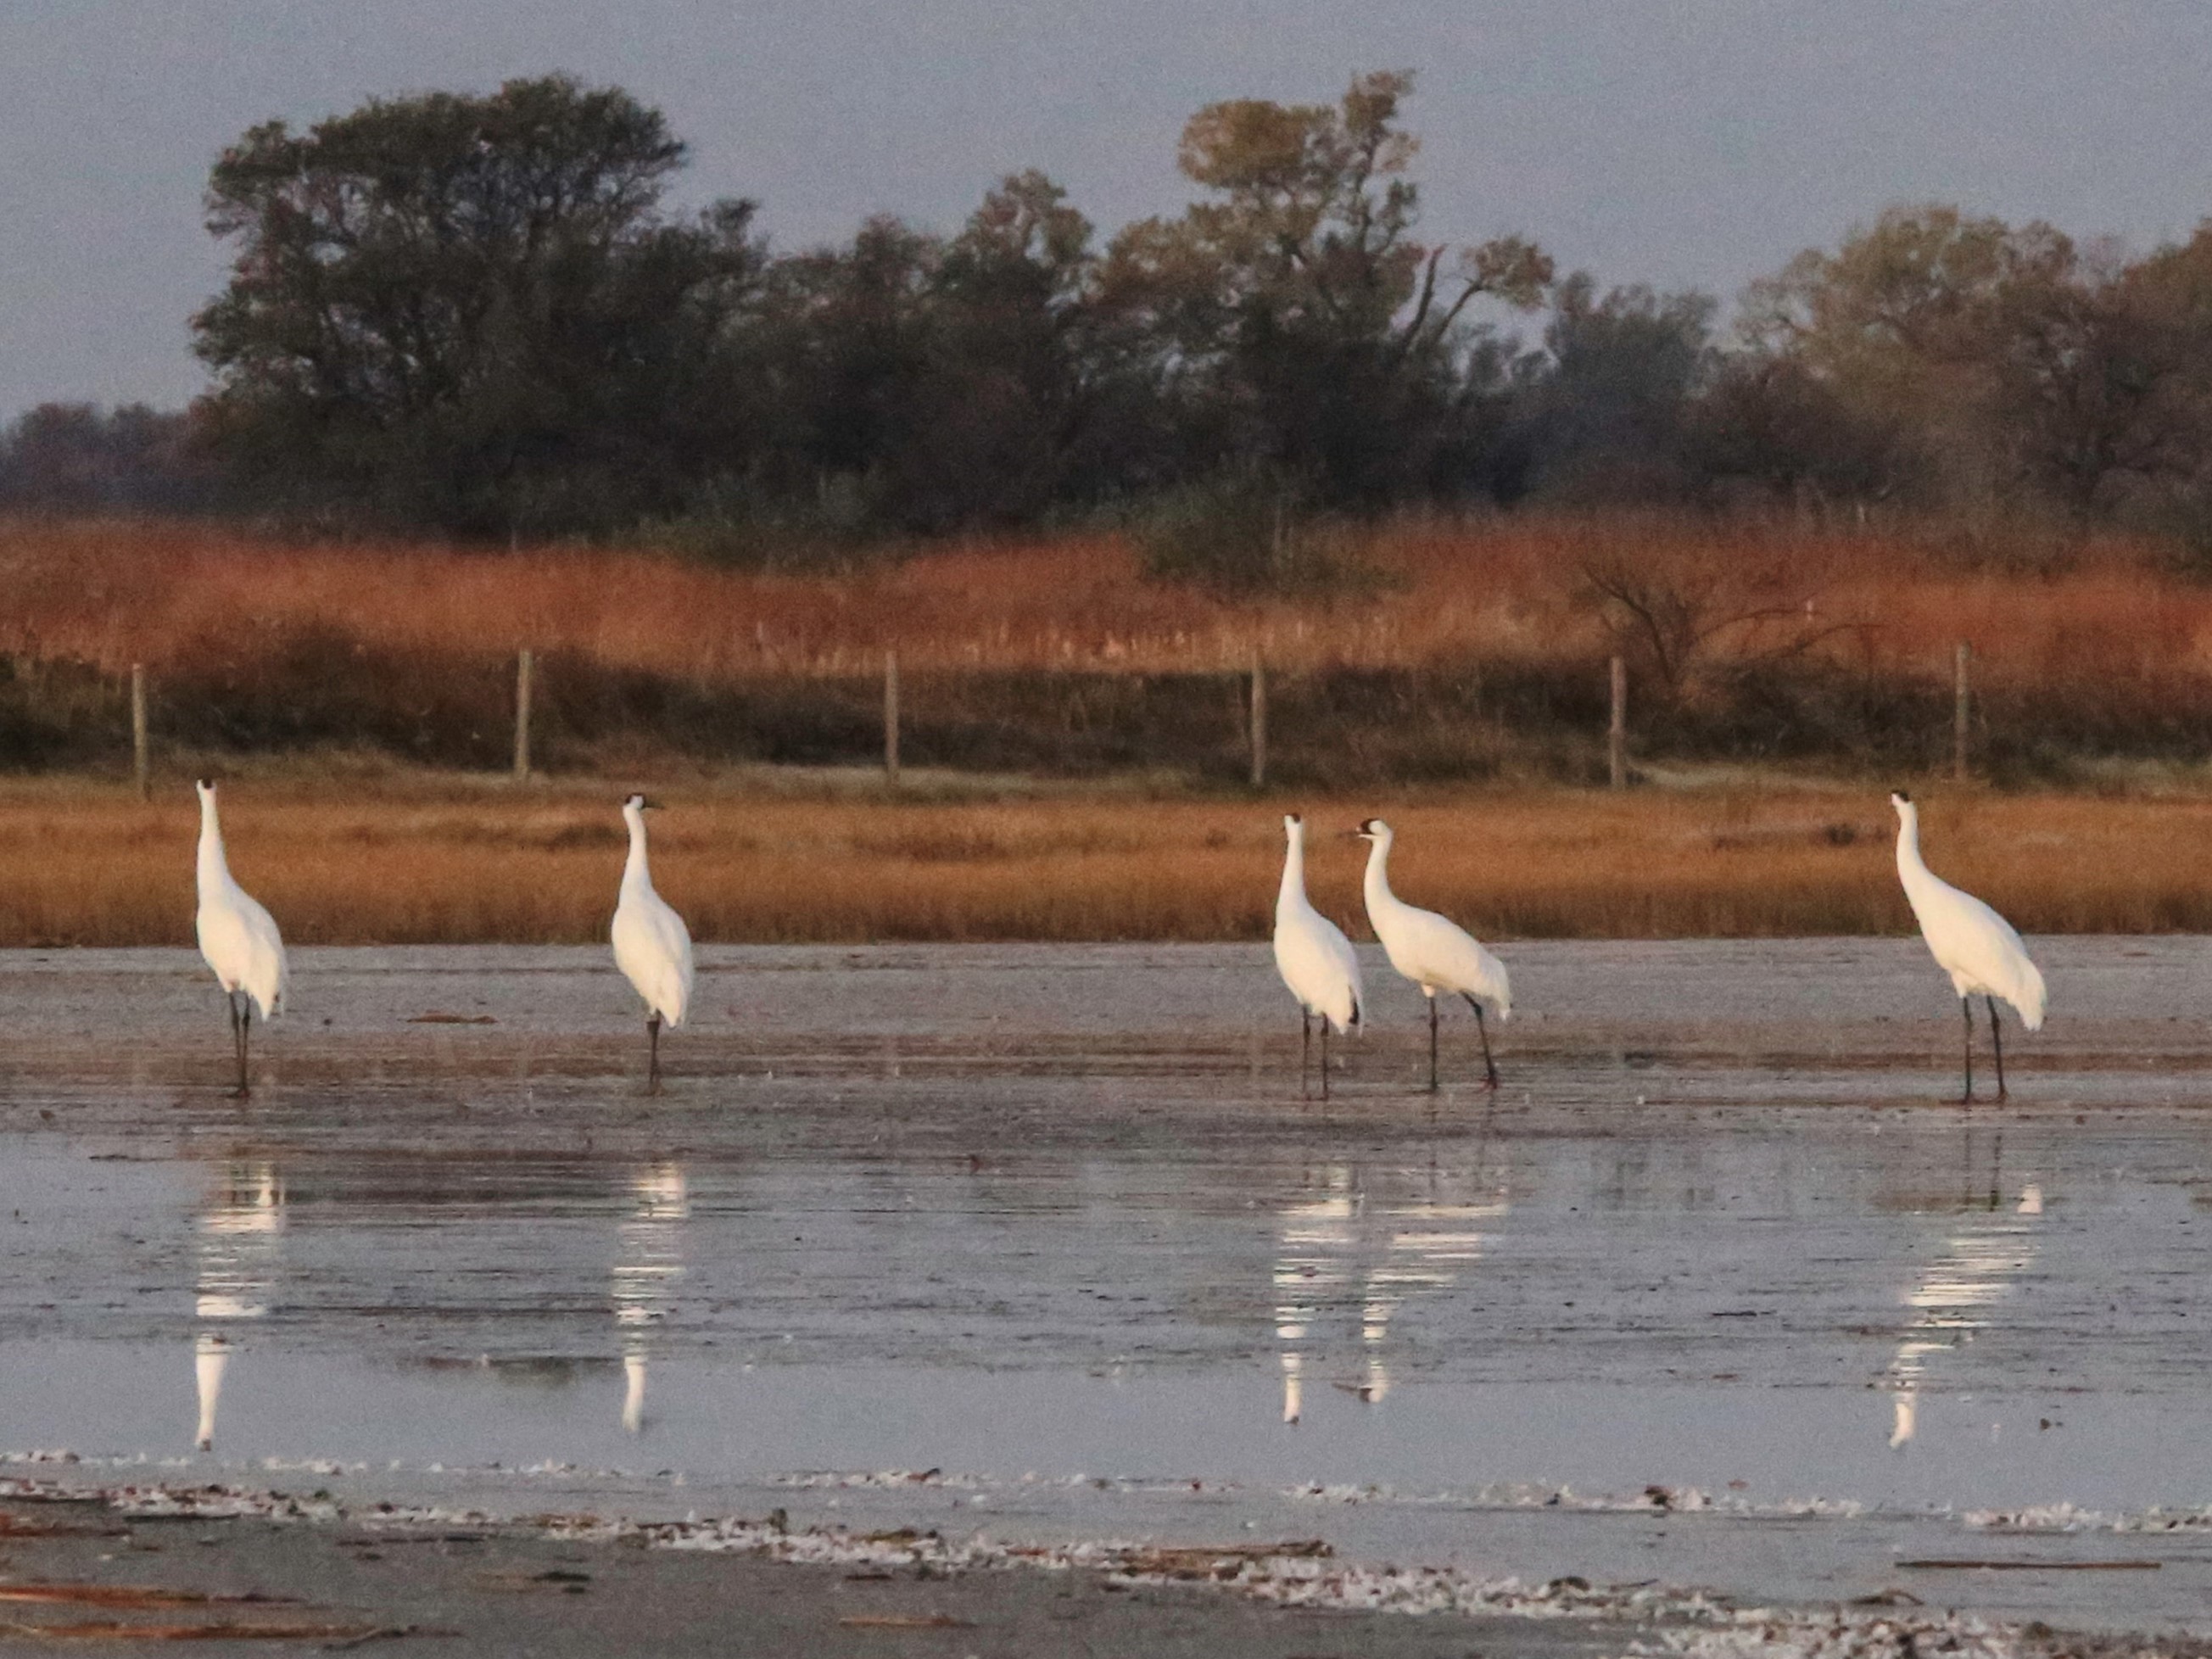 Whooping Cranes at Quivira Refuge by Heather Cwach